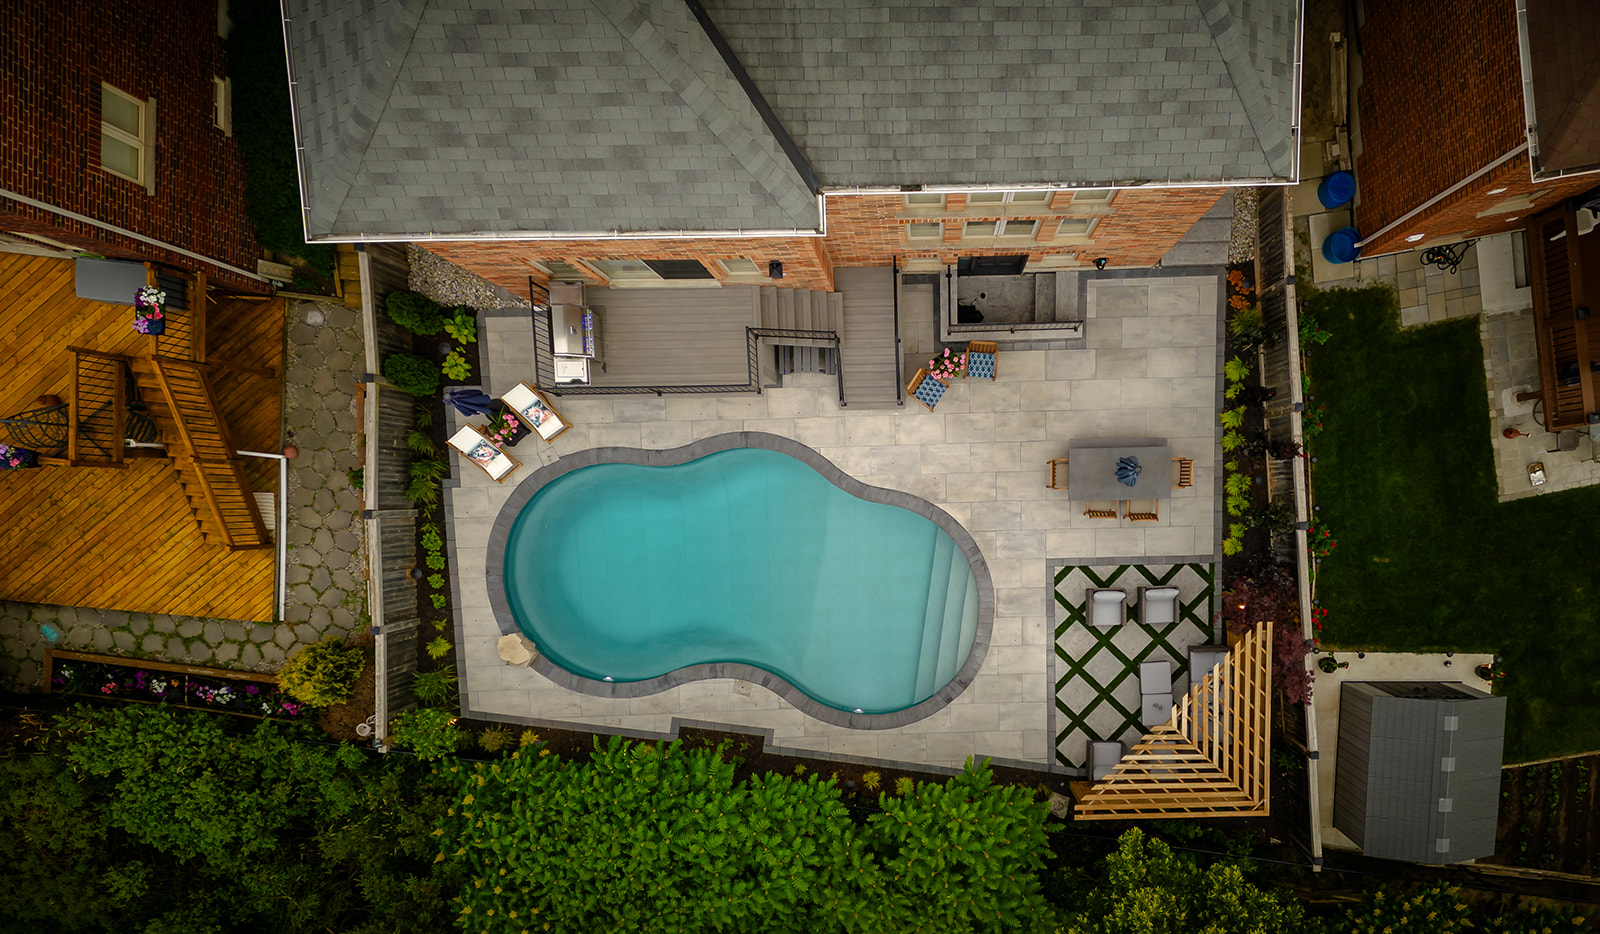 Top-down view of a circular pool, outdoor patio set and an outdoor table.